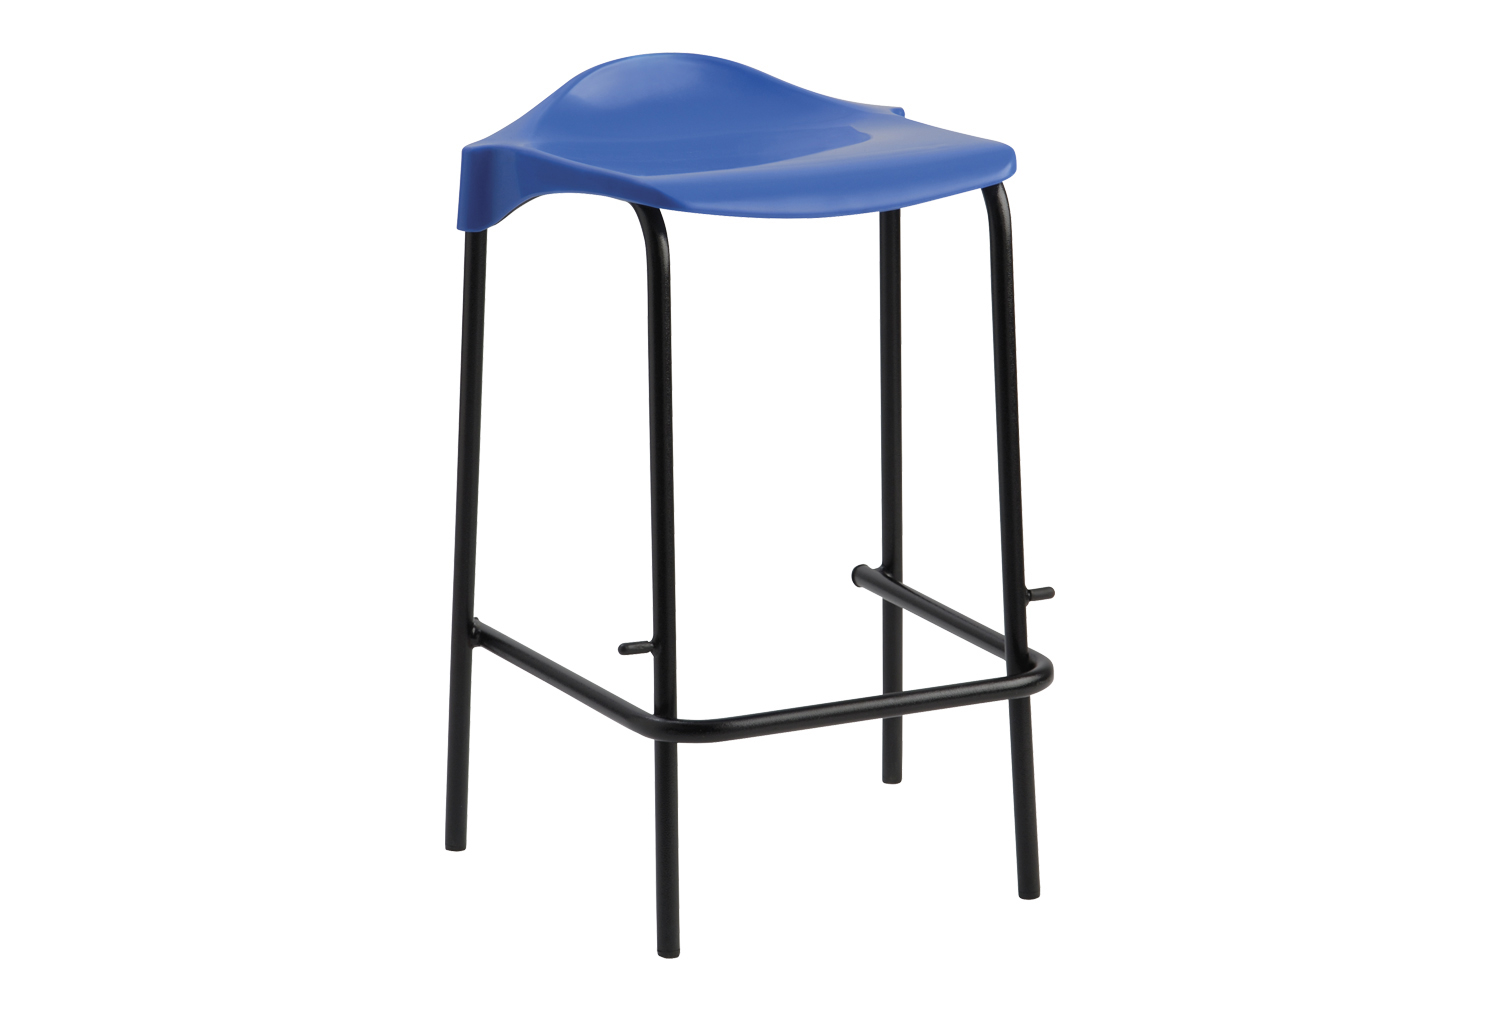 Qty 6 - Educate Poly Low Back Classroom Stools, 40h (cm), Chrome Silver Frame, Blue Shell